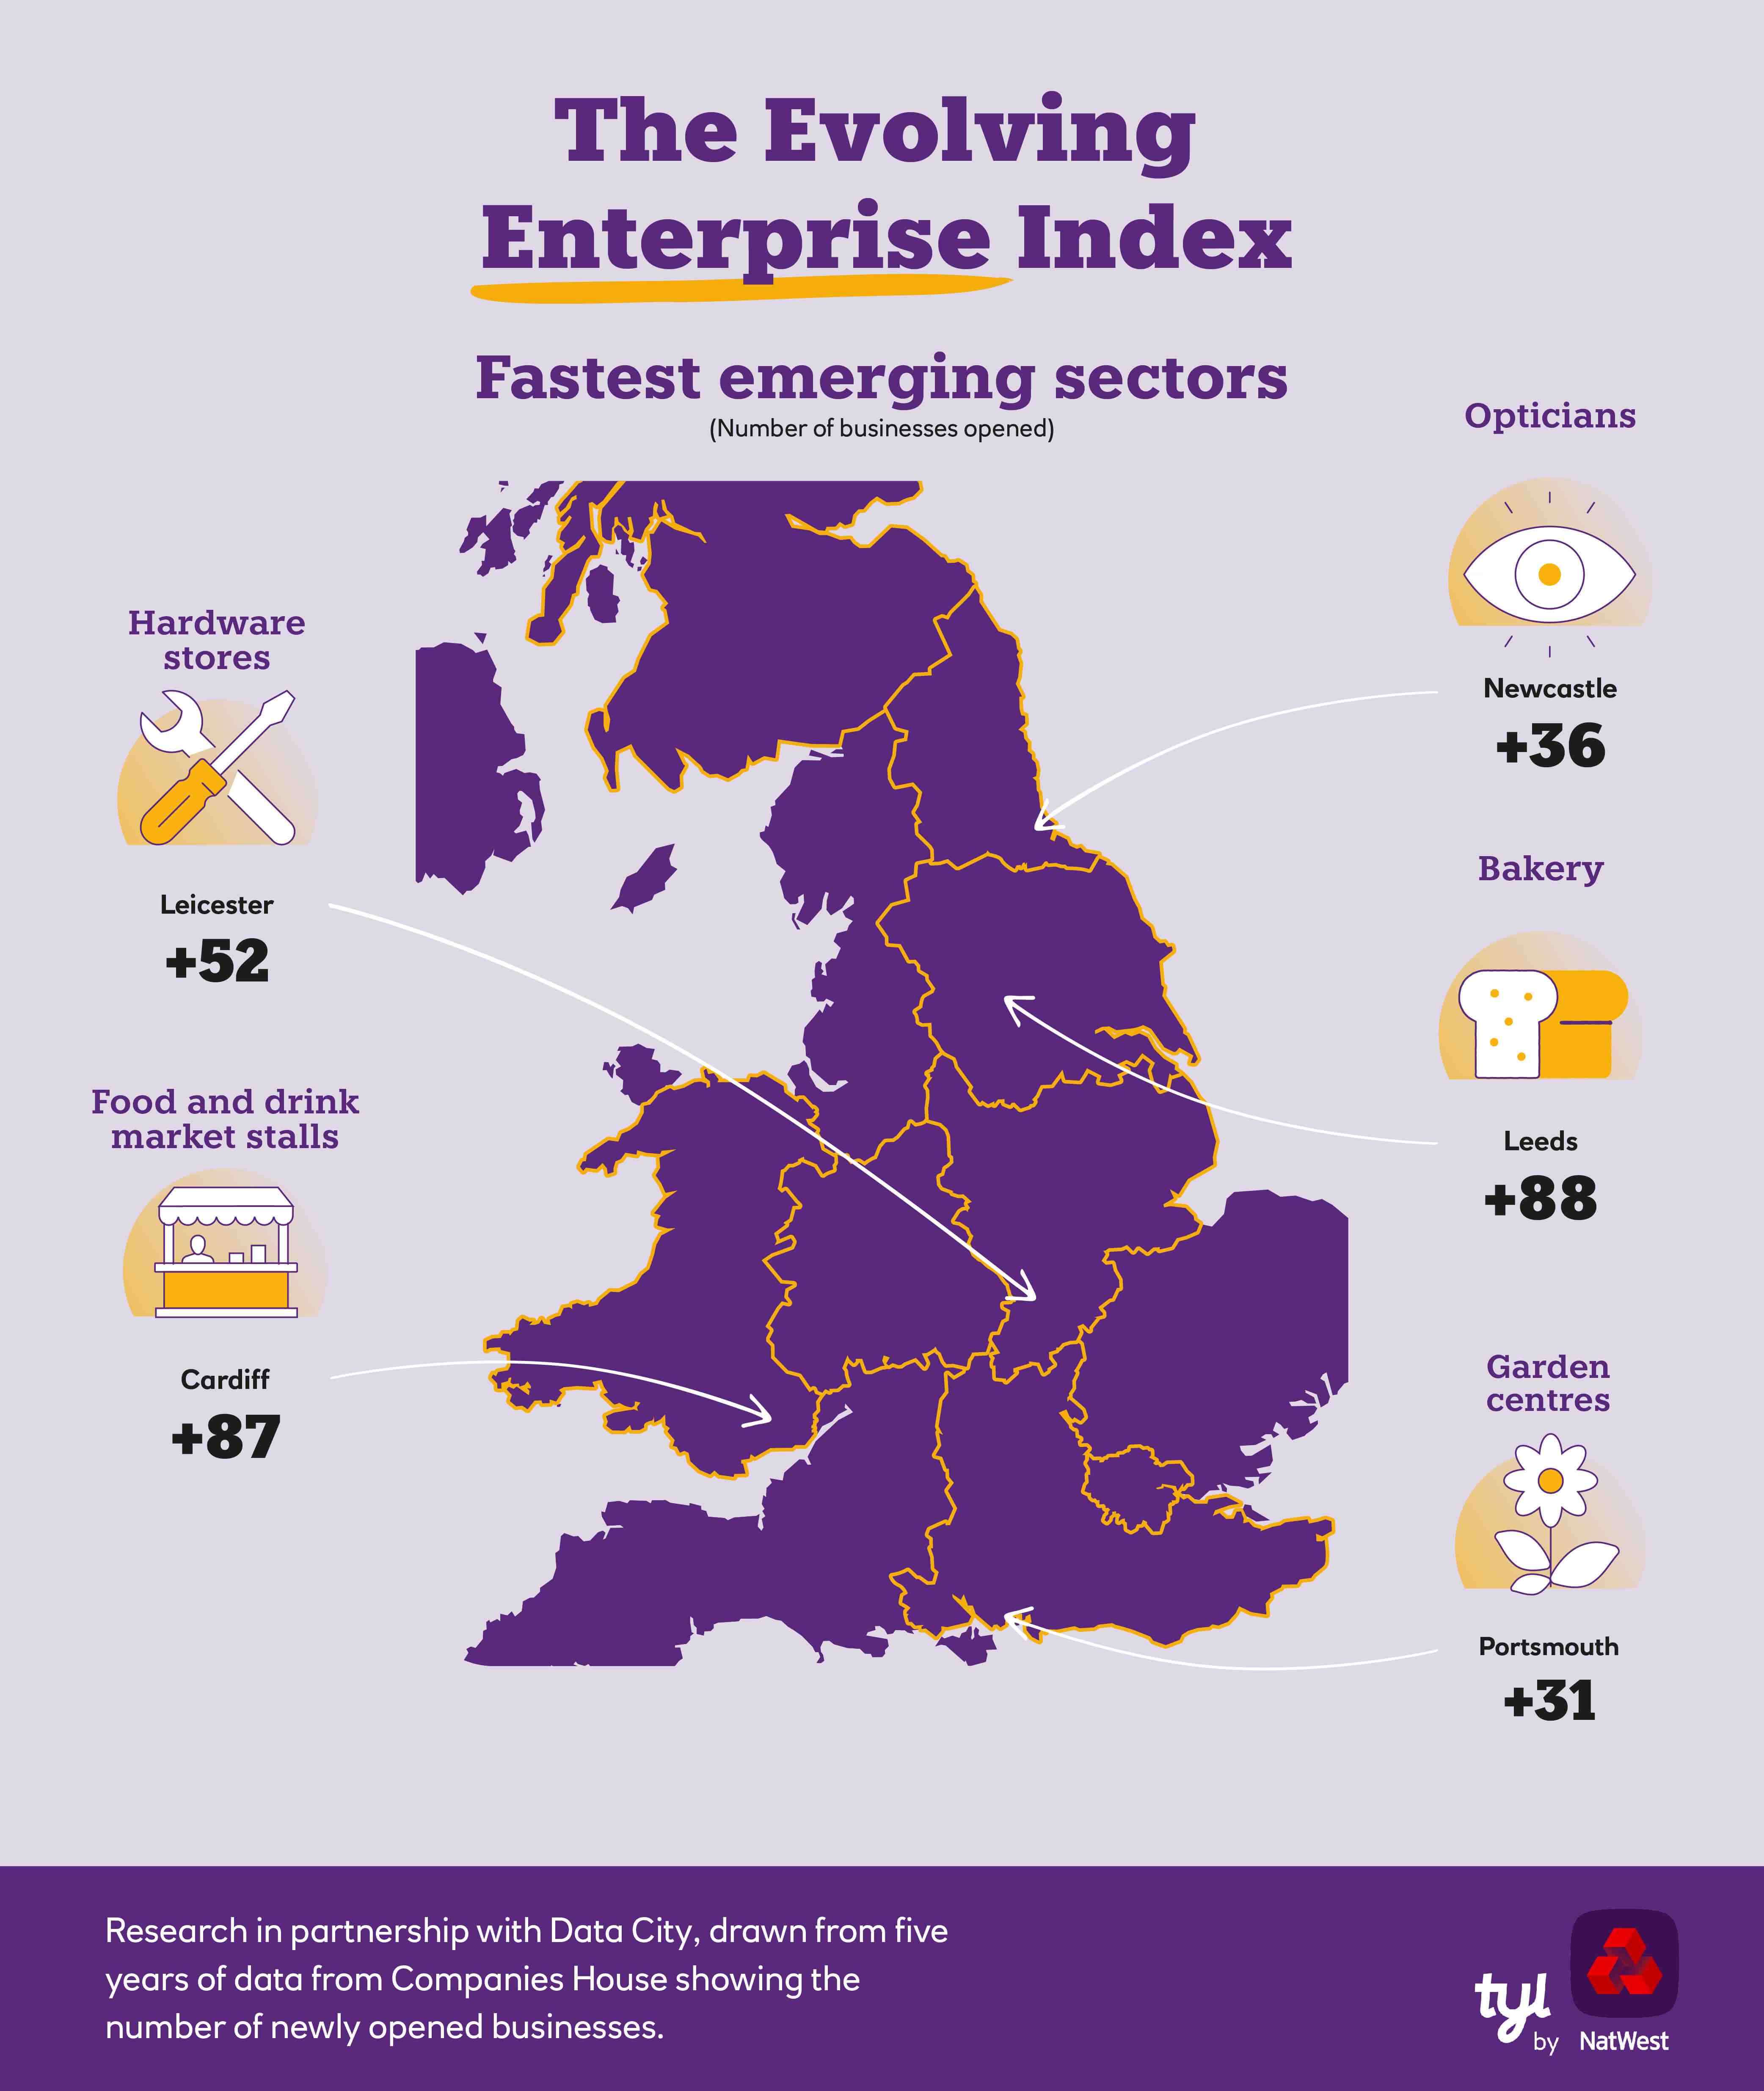 Fastest emerging sectors in the UK